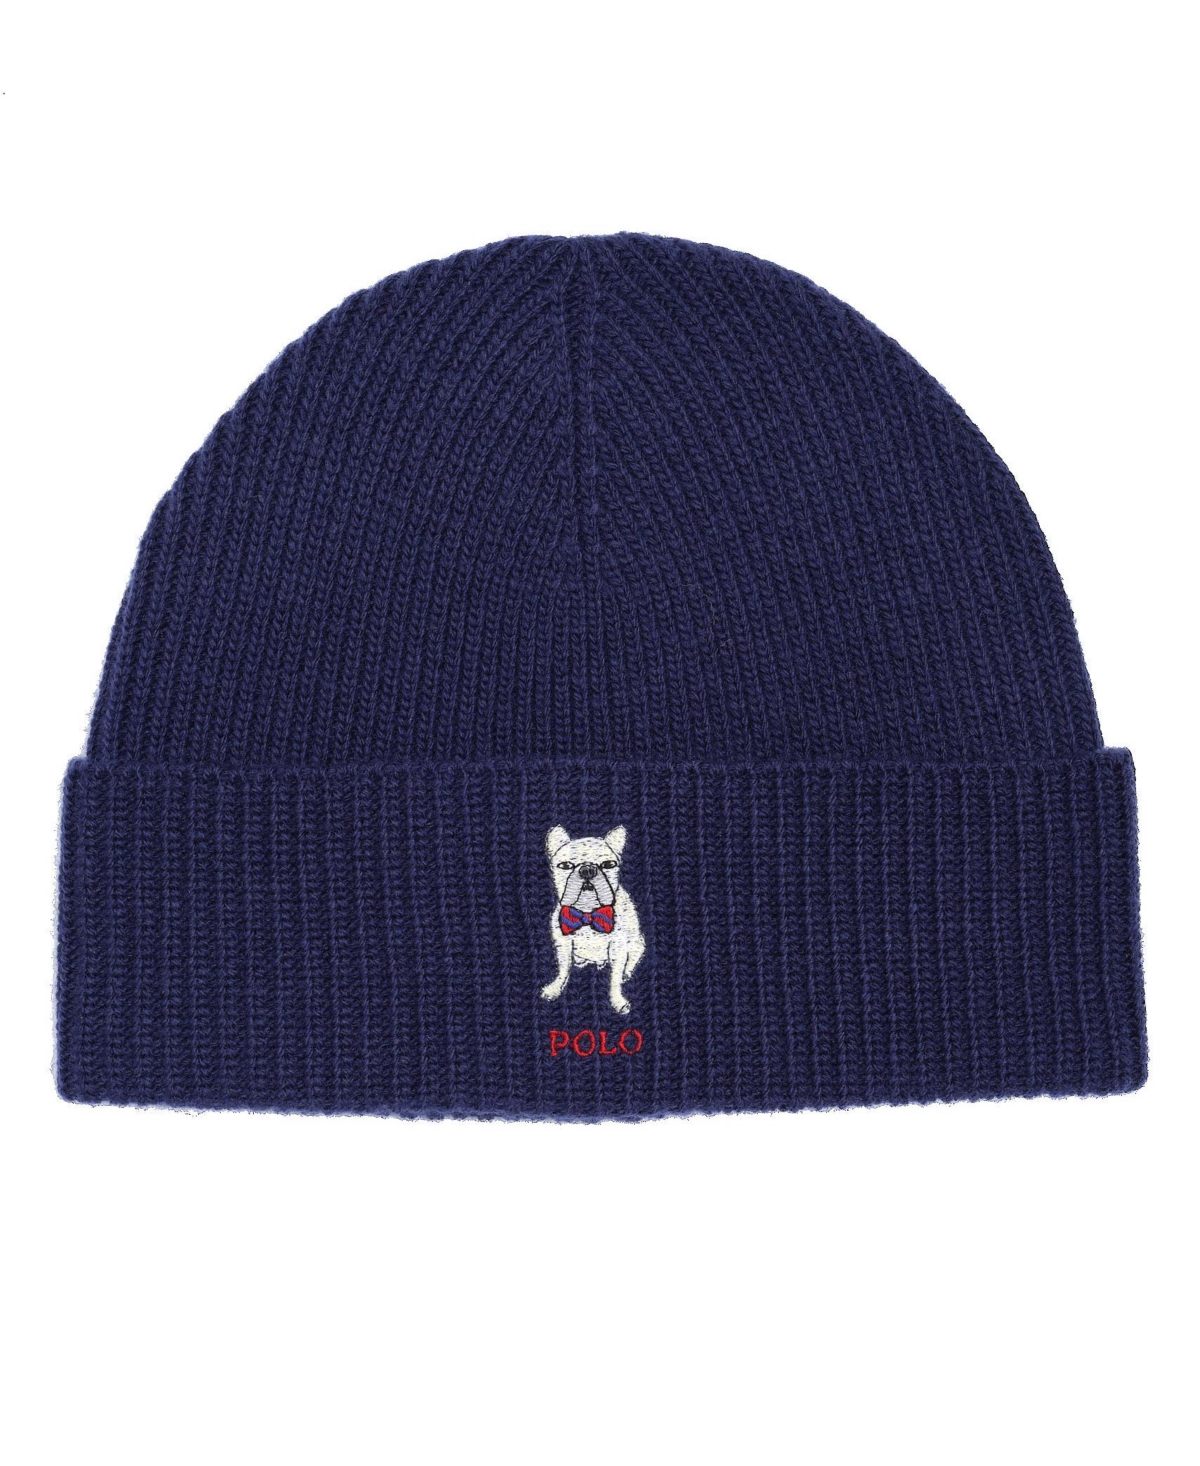 Polo Ralph Lauren Men's Embroidered Frenchie Beanie In Newport Navy